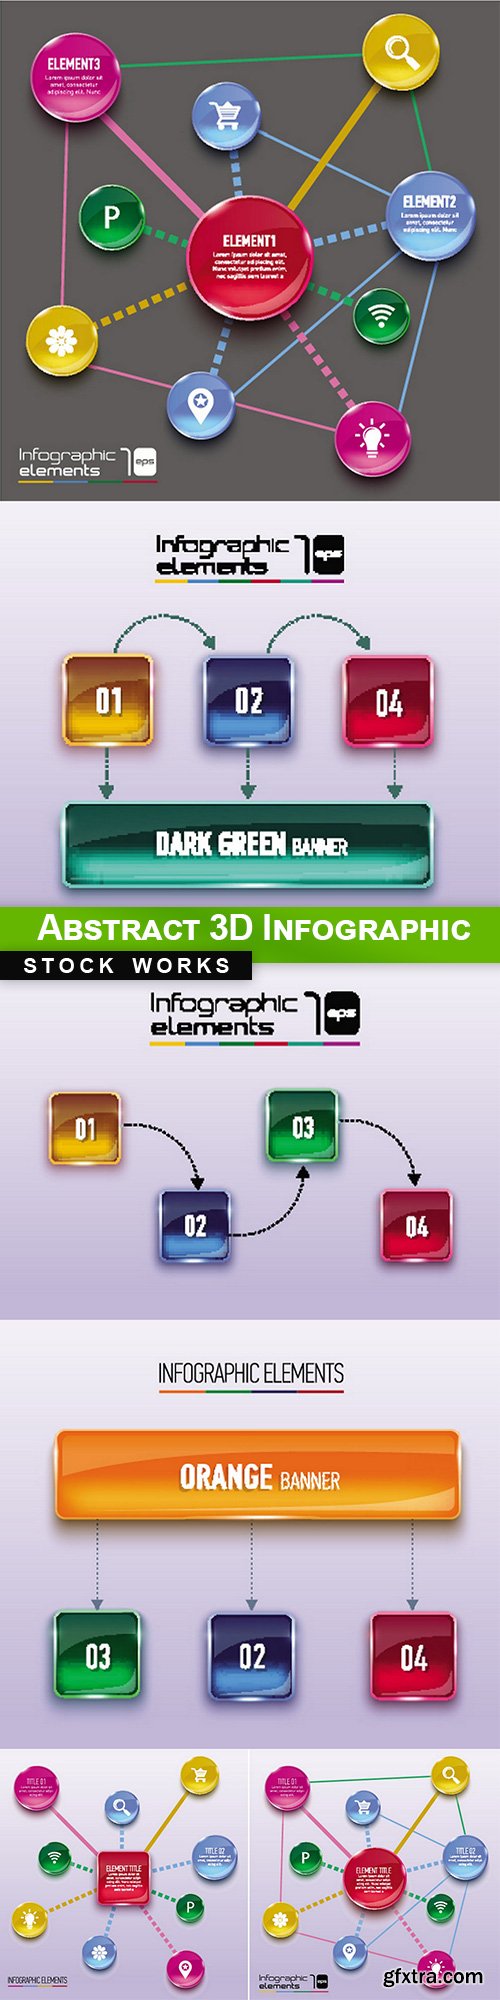 Abstract 3D Infographic - 6 EPS